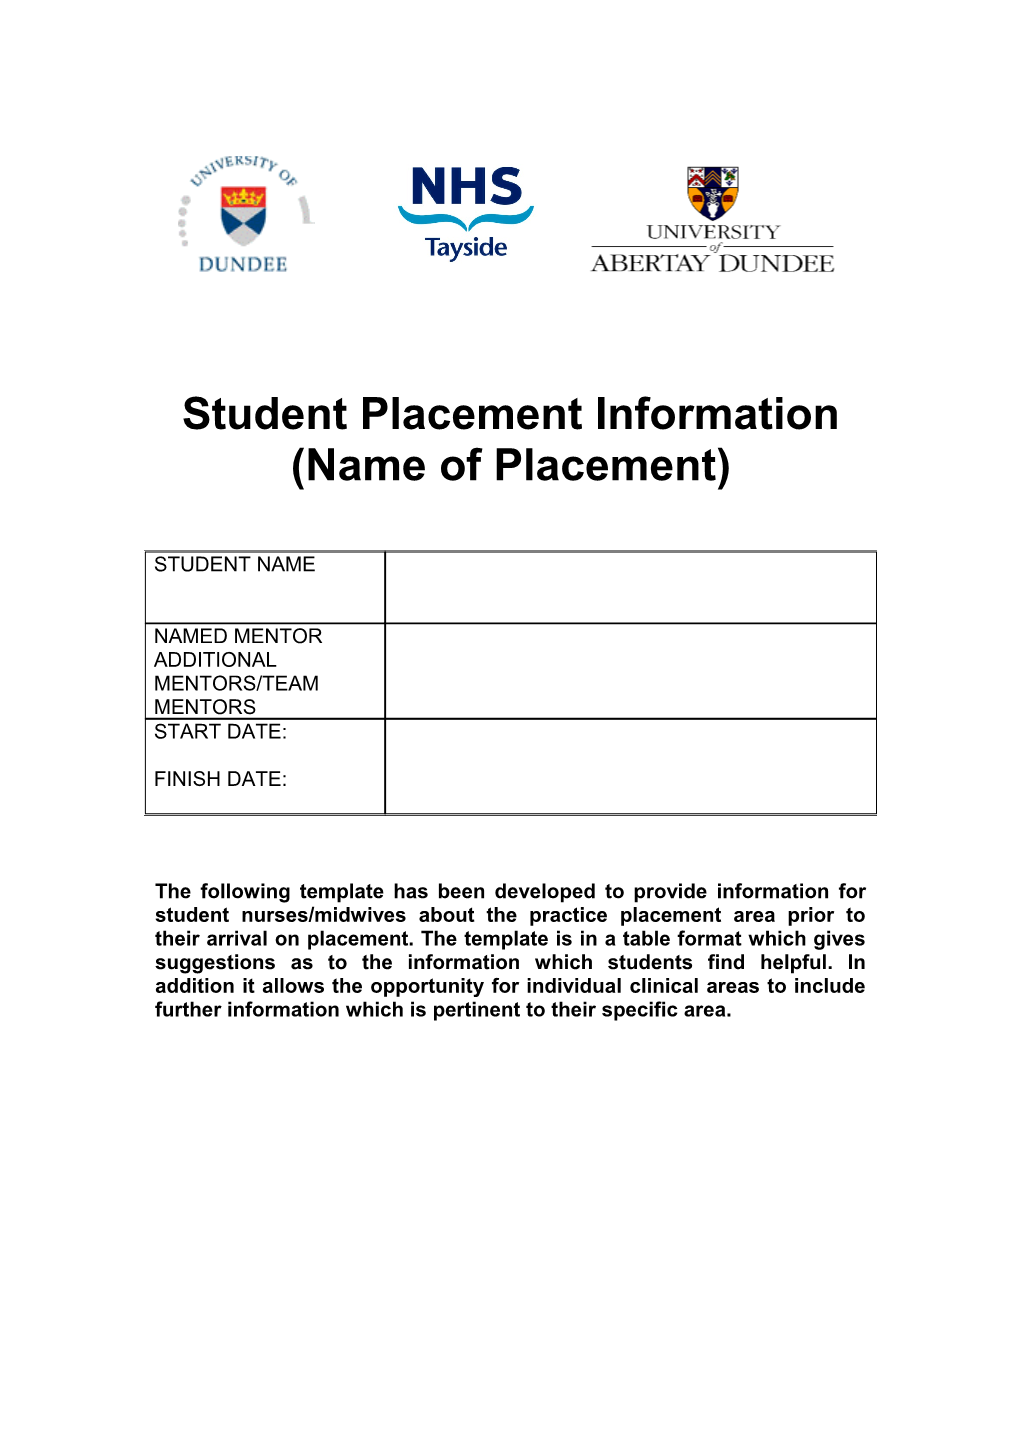 Student Placement Information s2